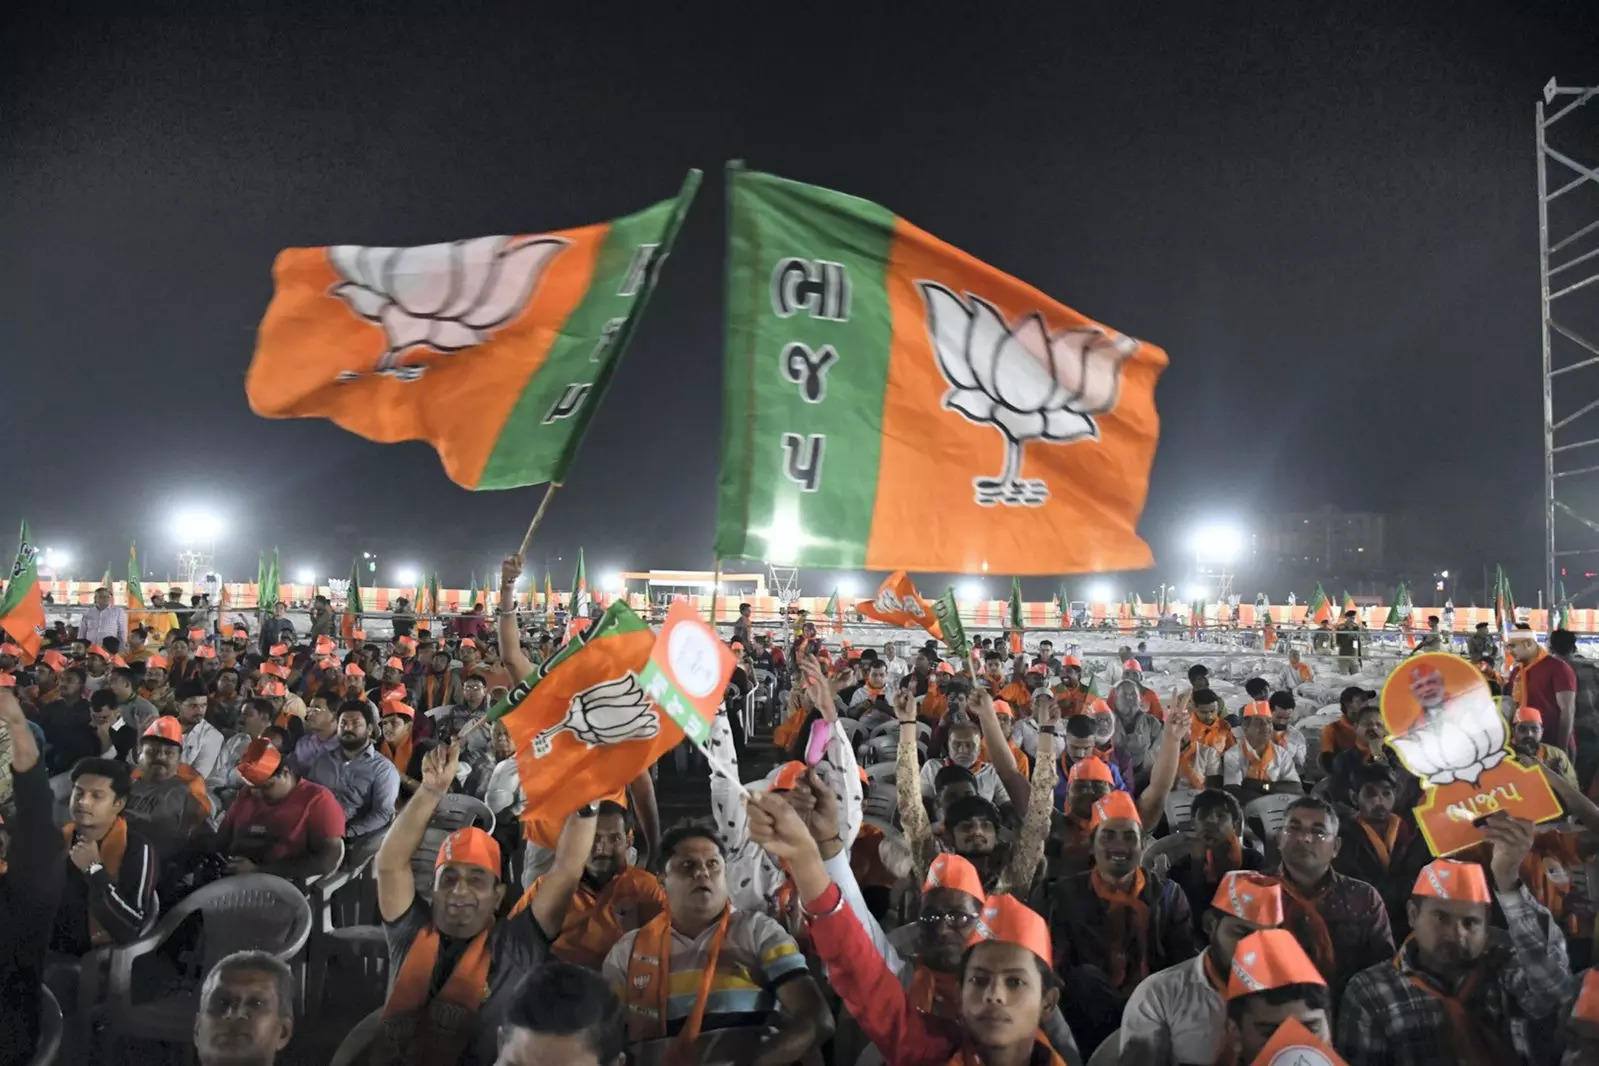 BJP supporters wave party flag during Prime Minister Narendra Modi's public meeting ahead of Gujarat Assembly elections | Representational image